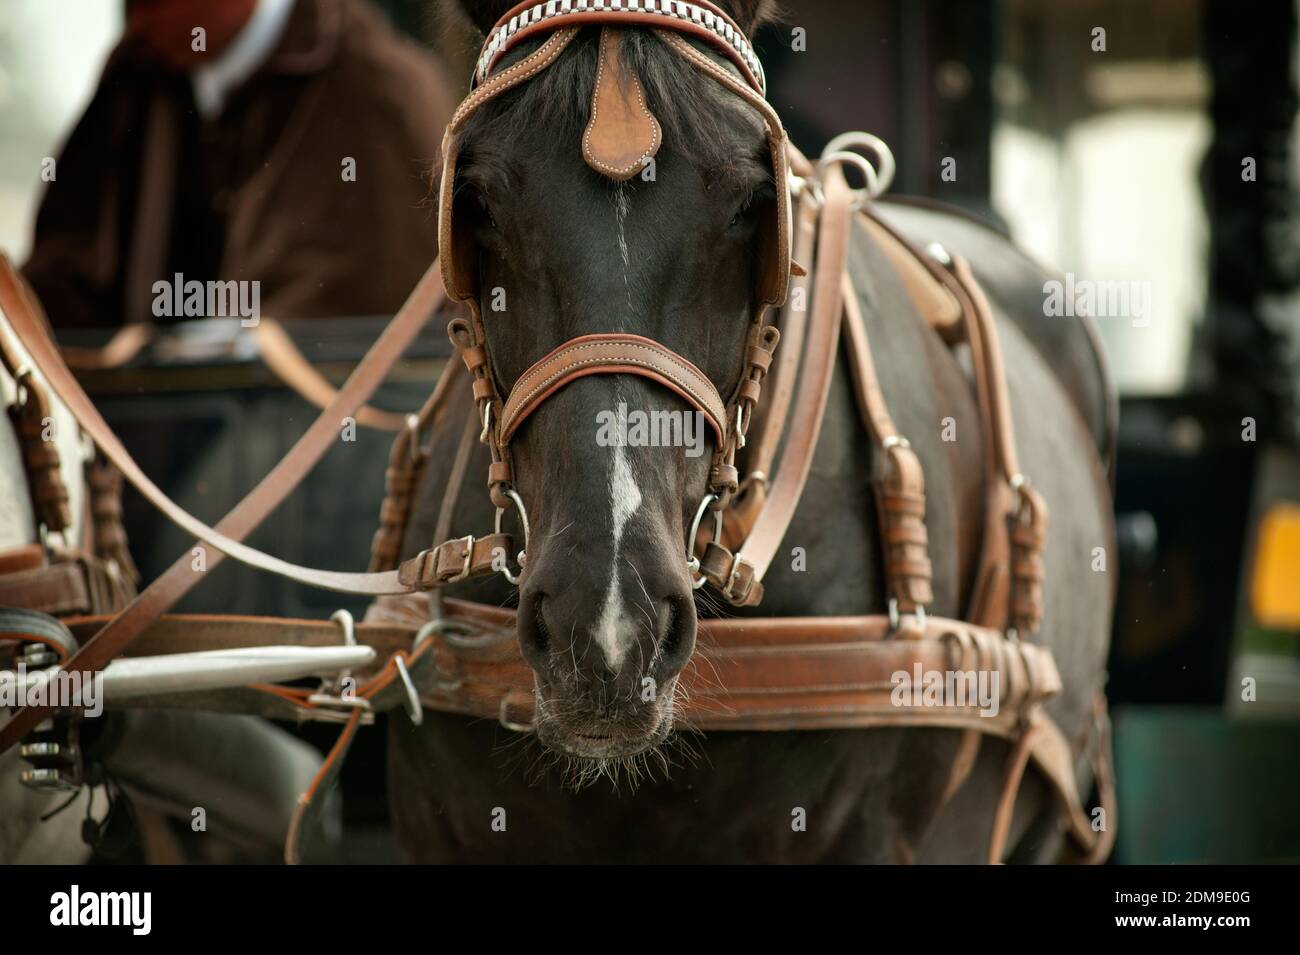 horse in carriage closeup Stock Photo